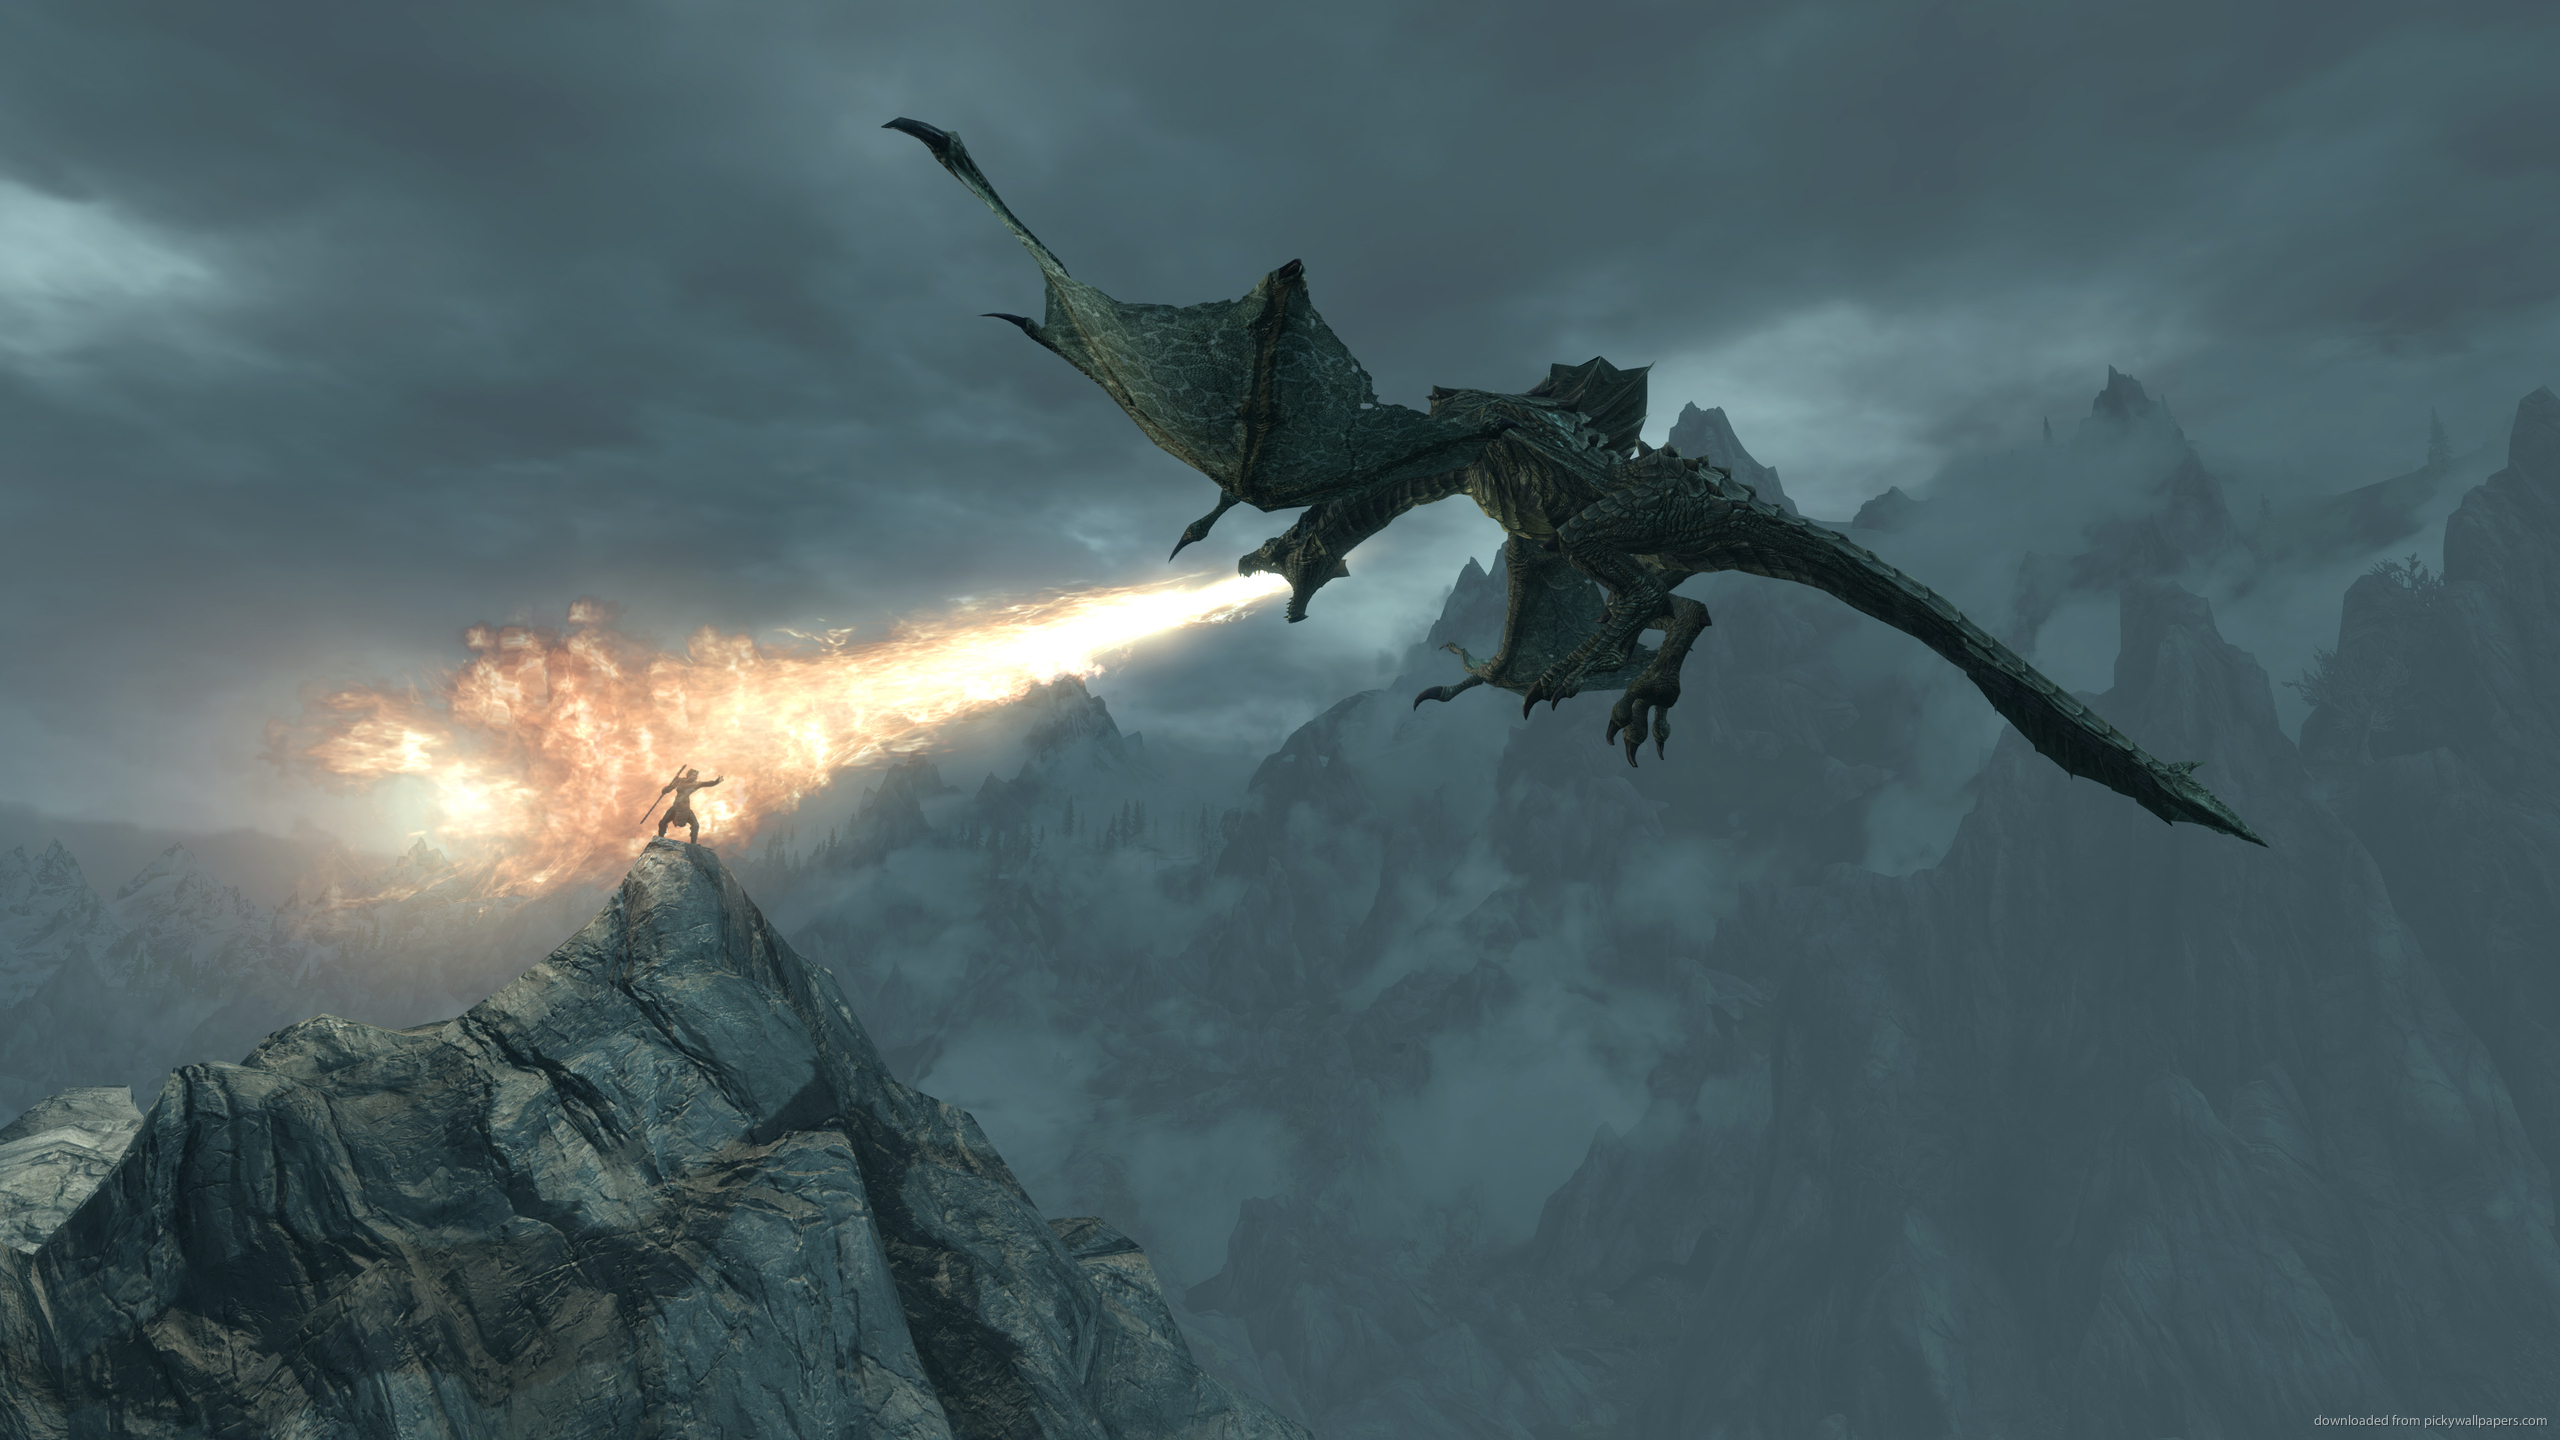 Epic Wallpapers 1080p Is Cool Wallpapers - Skyrim Dragon Breathing Fire - HD Wallpaper 